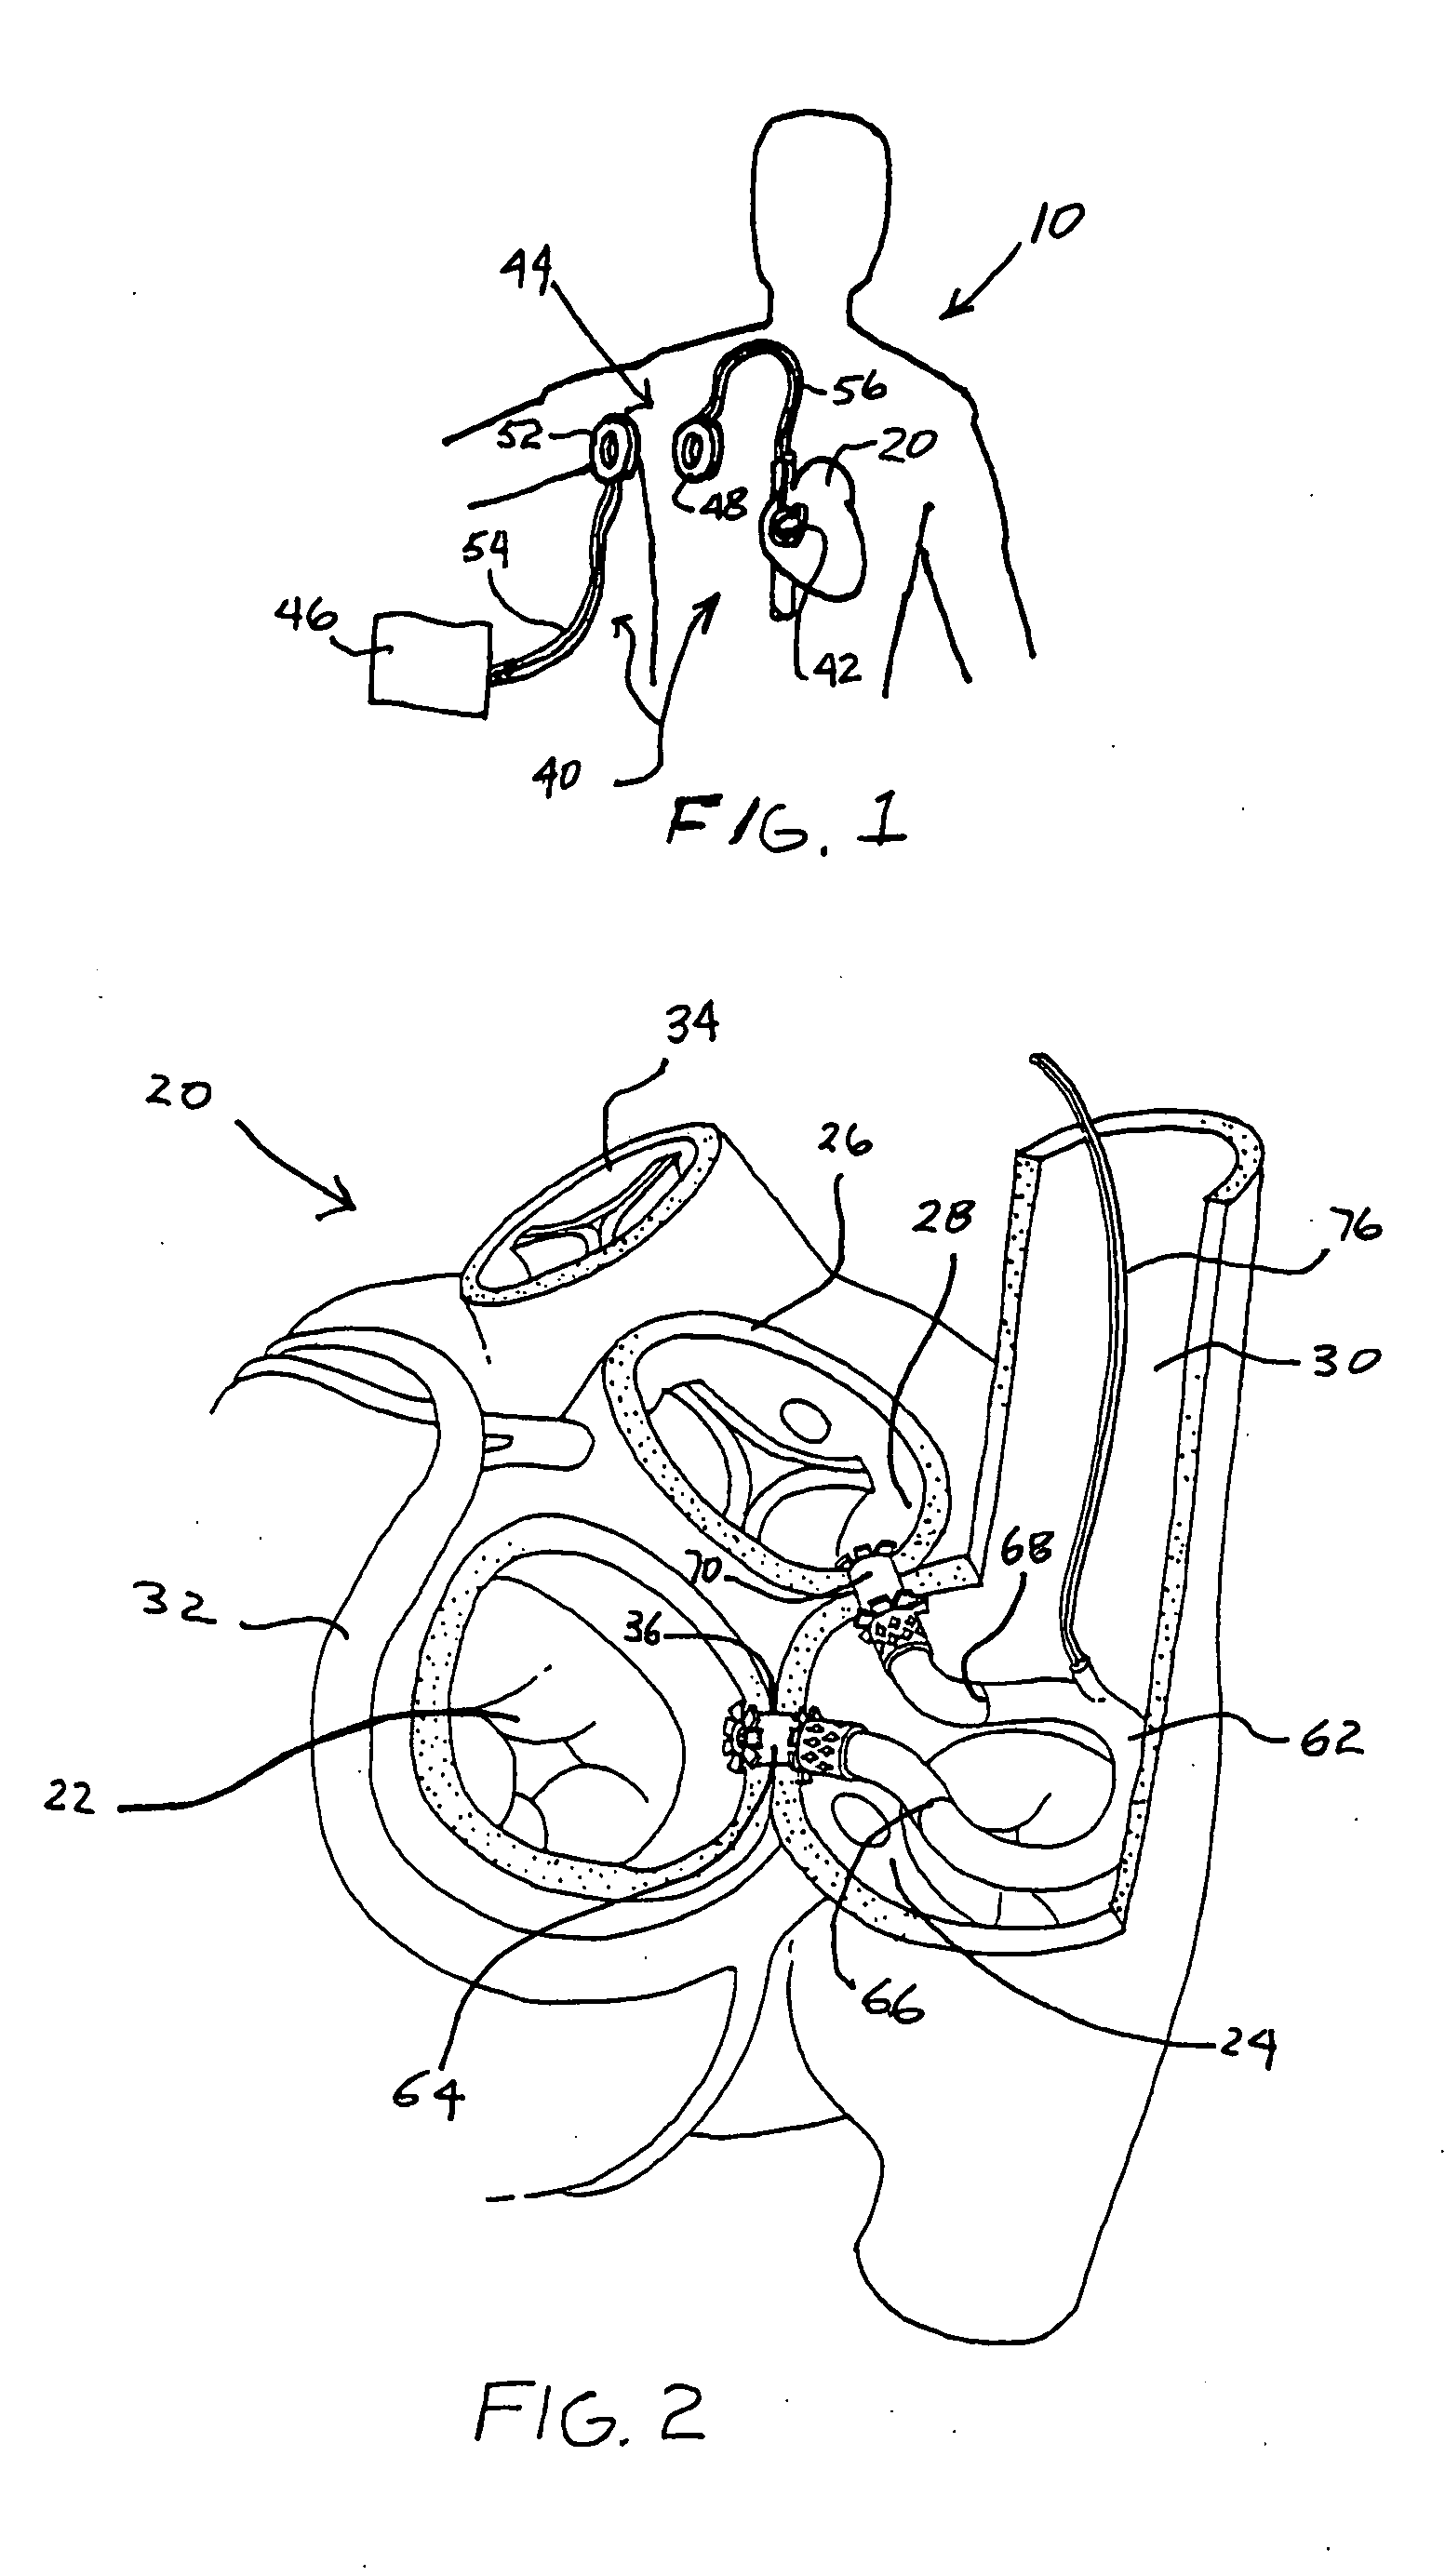 Left ventricular function assist system and method